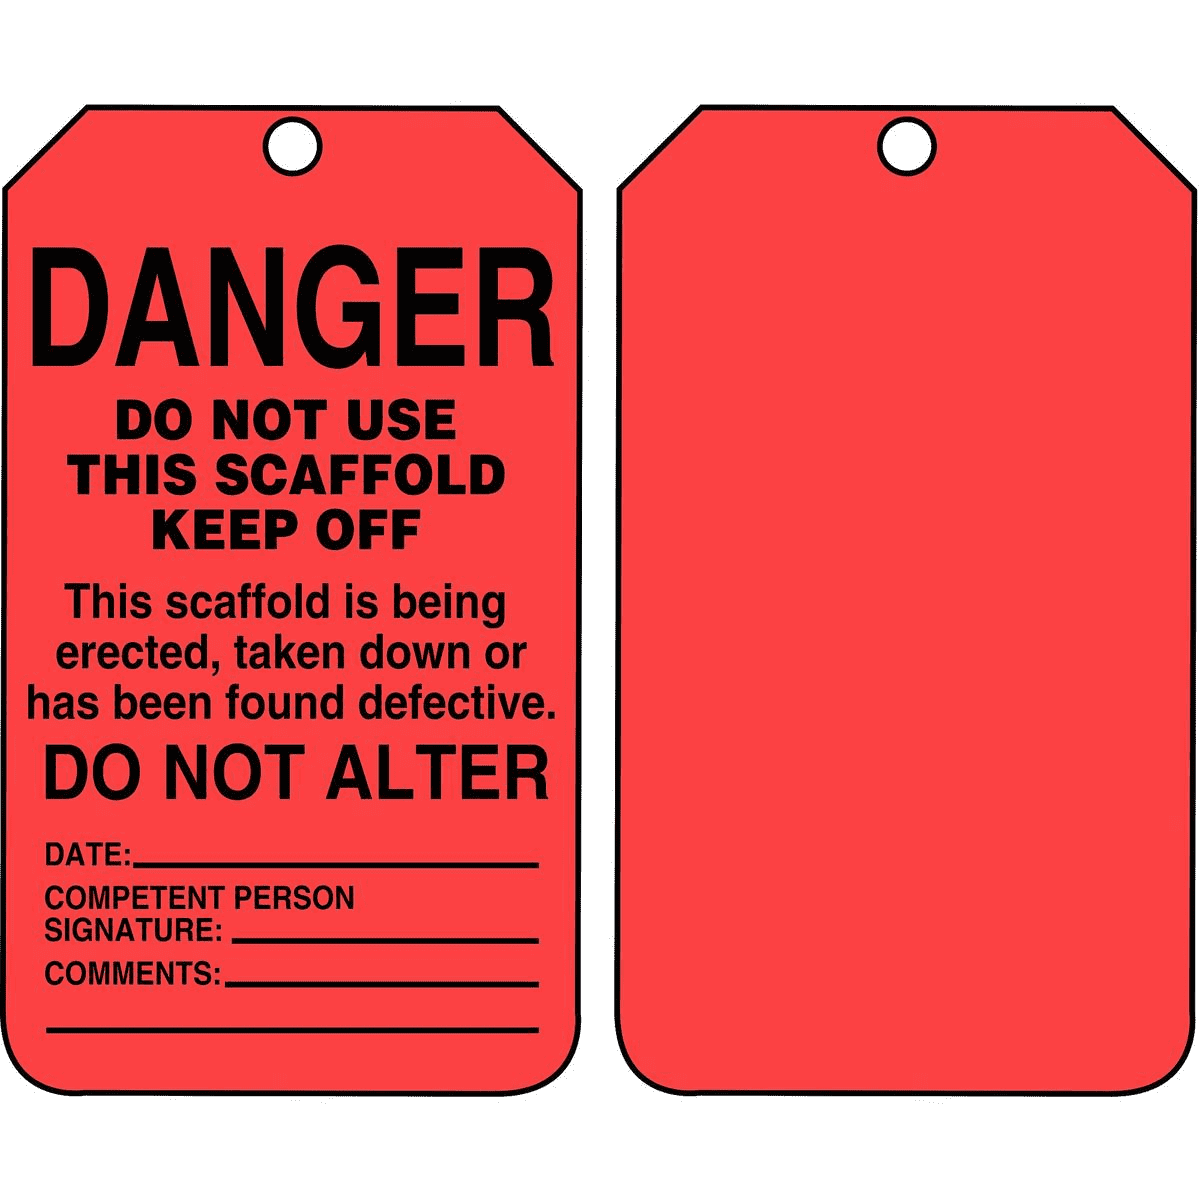 ACCUFORM TSS101CTP SAFETY TAG DANGER-DO NOT USE THIS SCAFFOLD-KEEP OFF 1EA=25/PK 